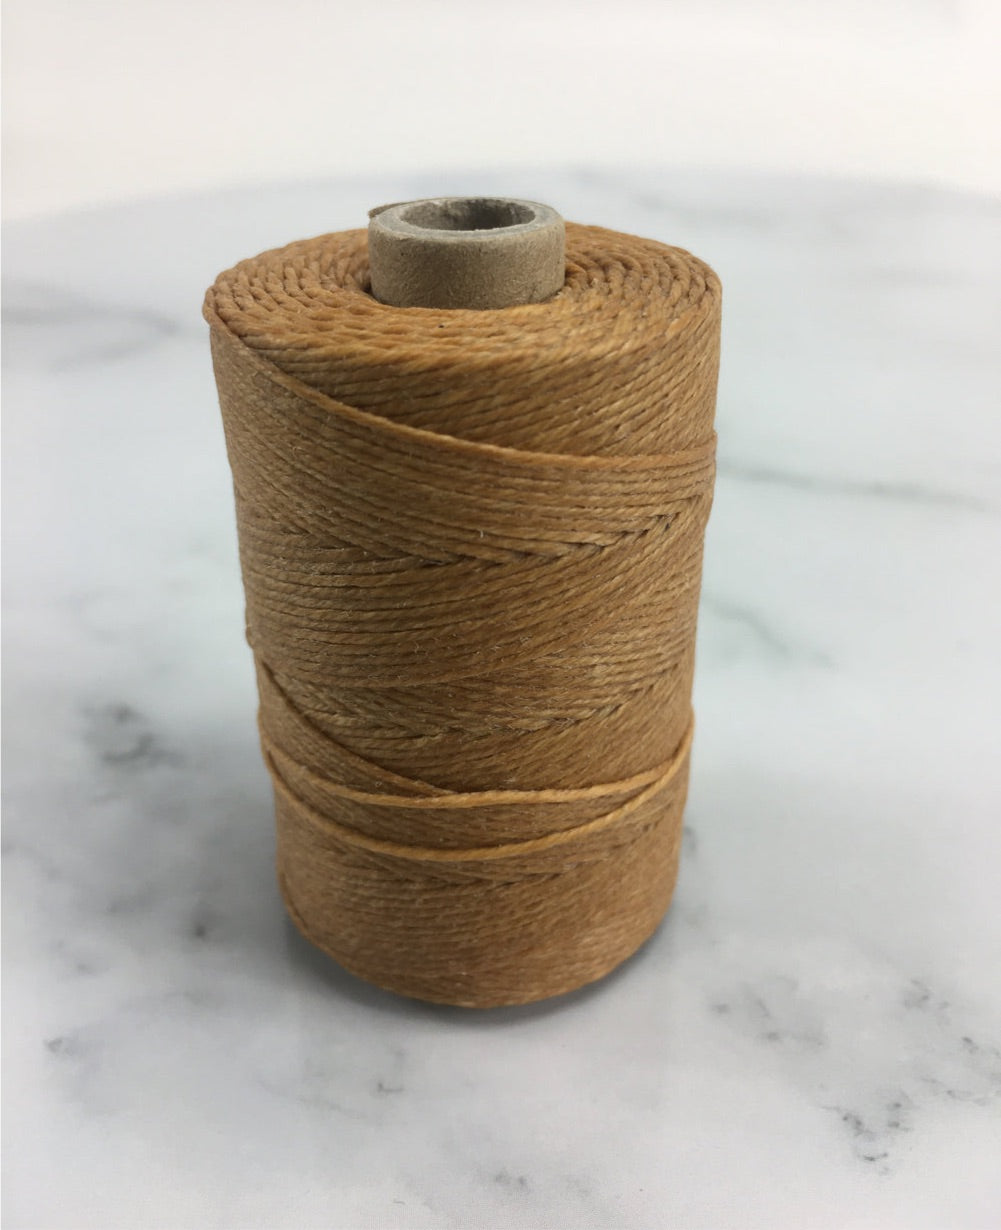 Yellow Ochre- Per spool 50g- 100% Pure Linen Thread- Waxed- 18/4 No.18 Cord 4- Approx 1mm thick